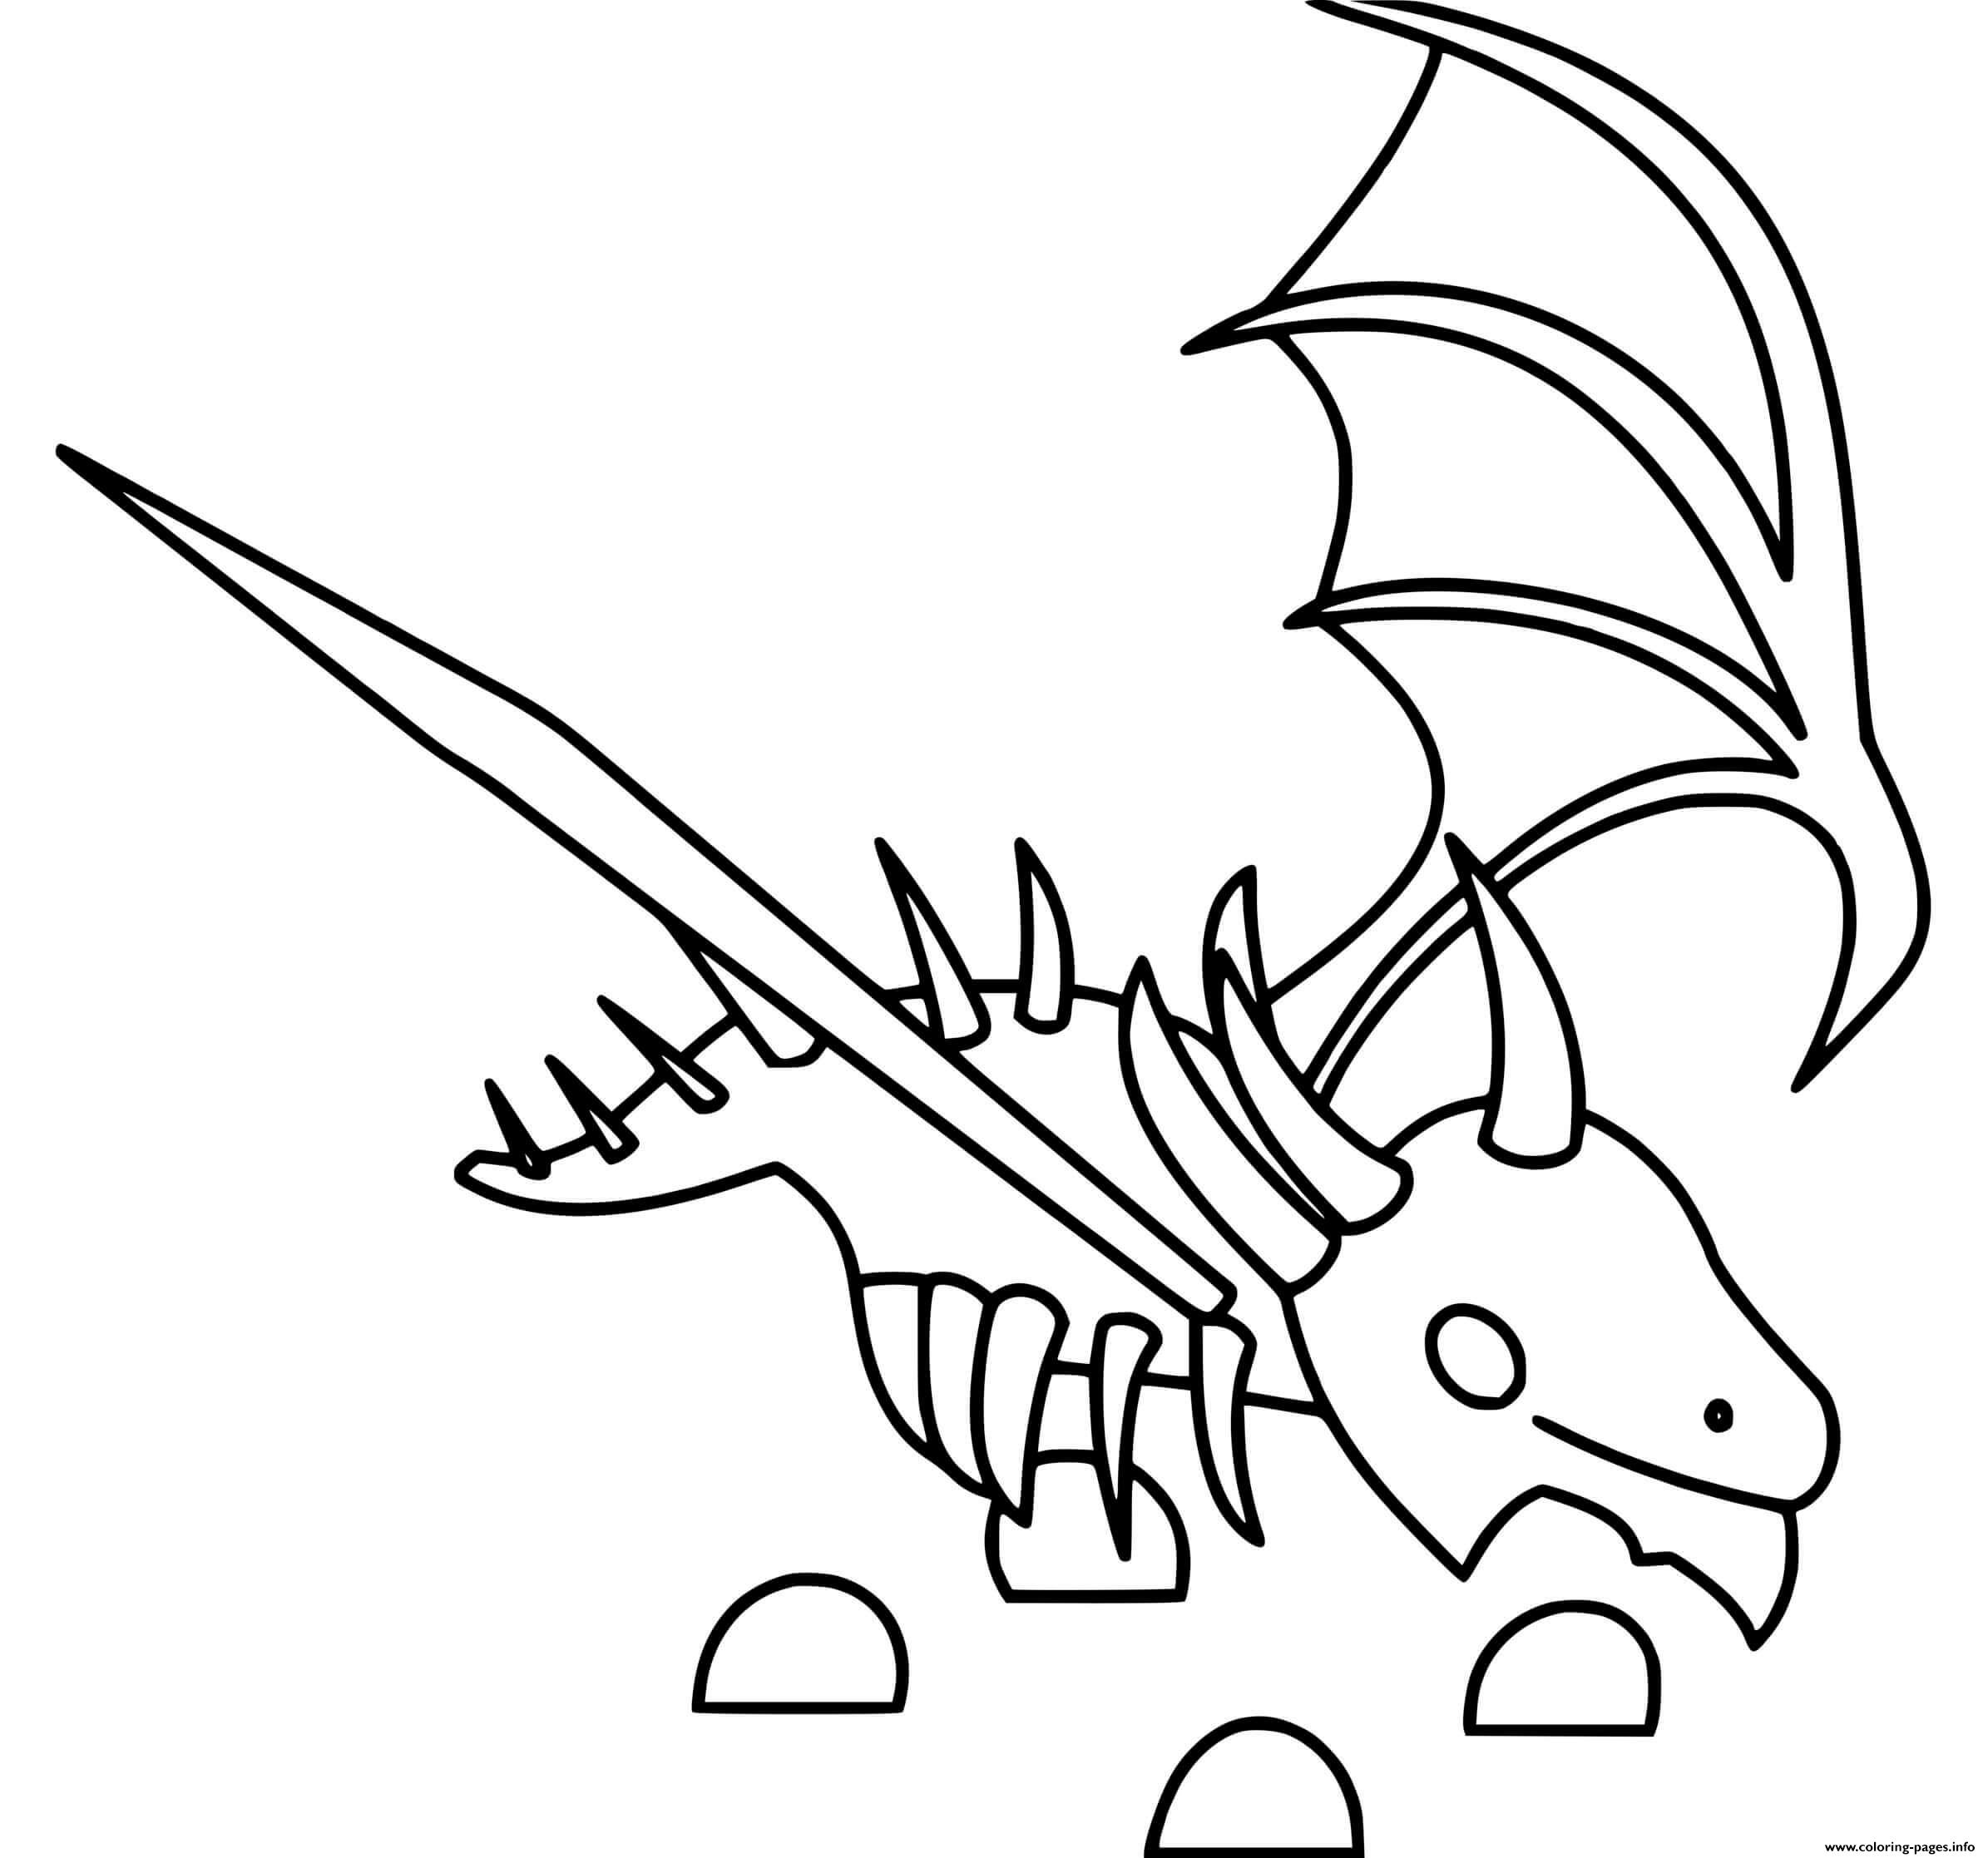 Roblox Adopt Me Shadow Dragon Coloring Pages Printable - shadow roblox adopt me dragon